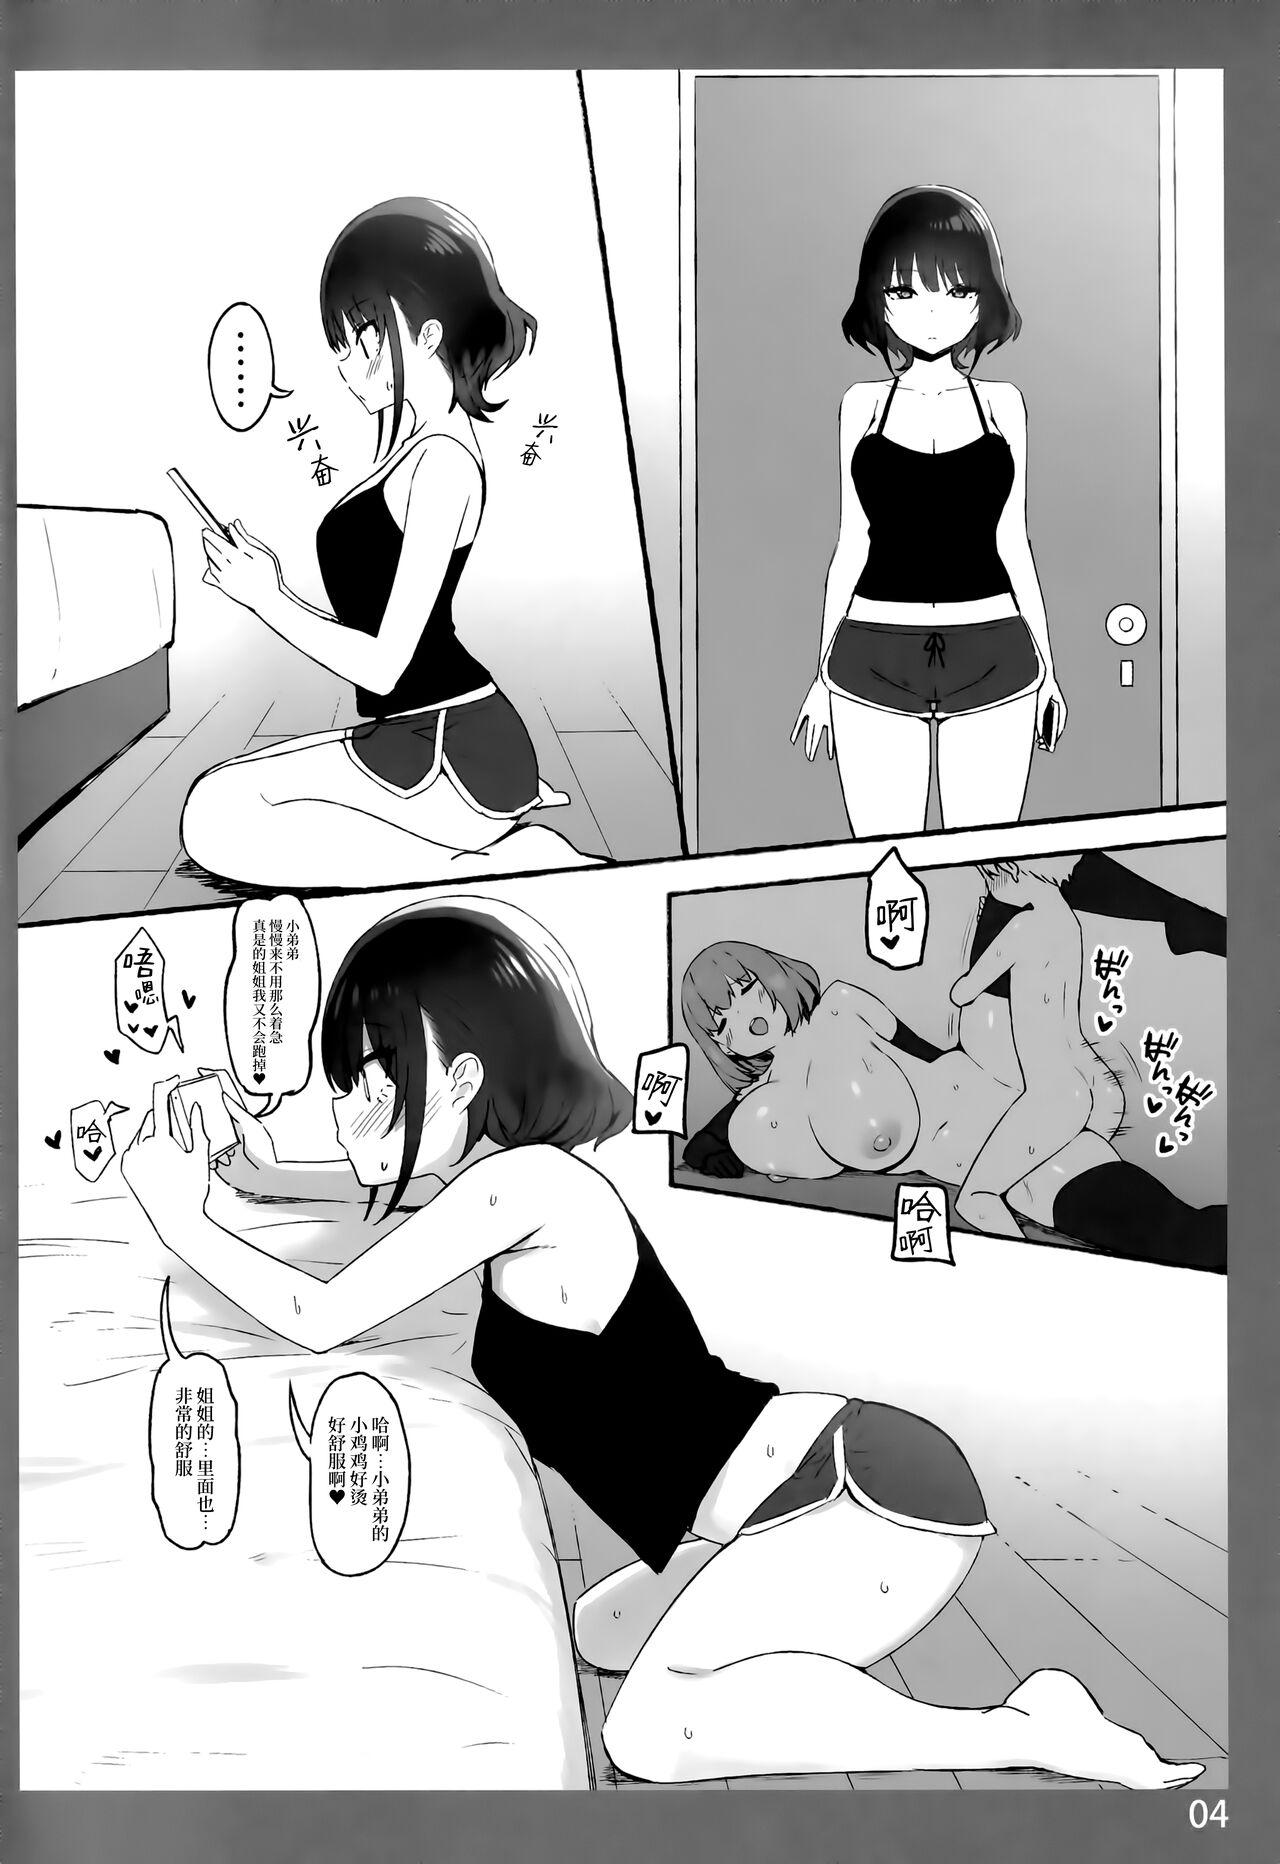 Passionate [Candy Club (Sky)] Onee-chan to Torokeru Kimochi SP | The Melting Feeling with Onee-chan SP [Chinese] [白杨汉化组] - Original Boobies - Page 3